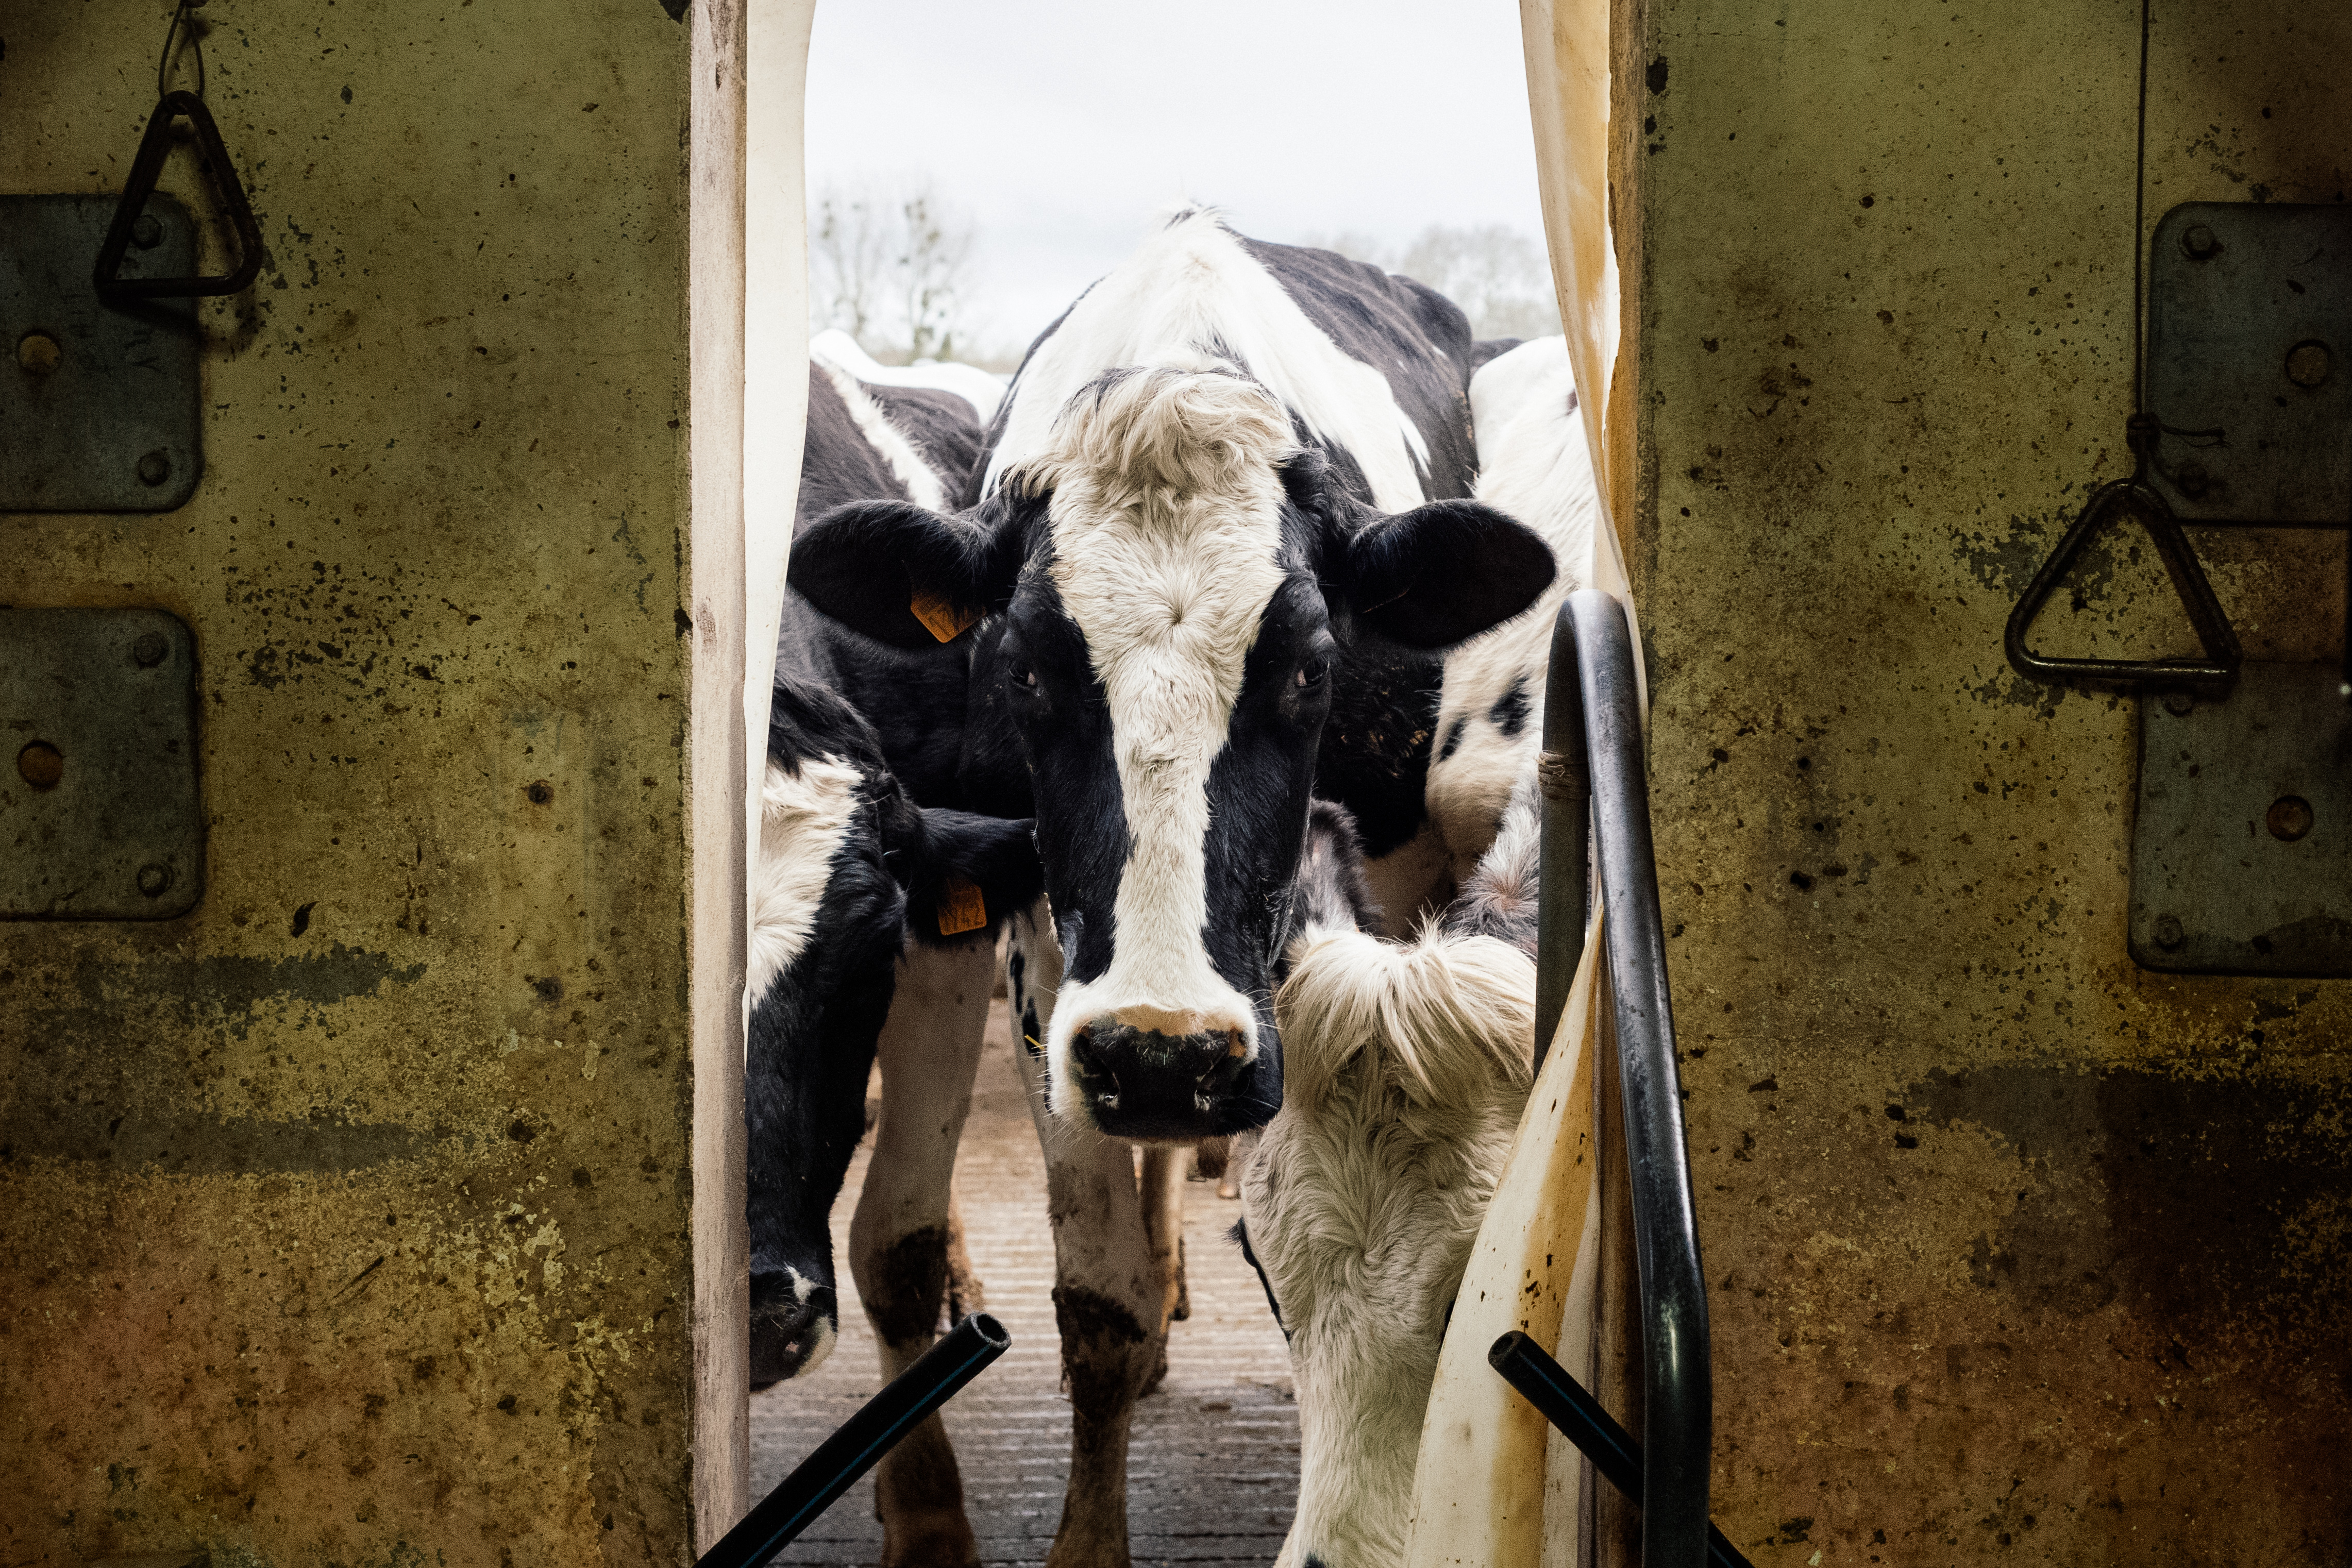 Catherine and Patrice Riauté – picture of a cow looking inside a building through a narrow opening. 